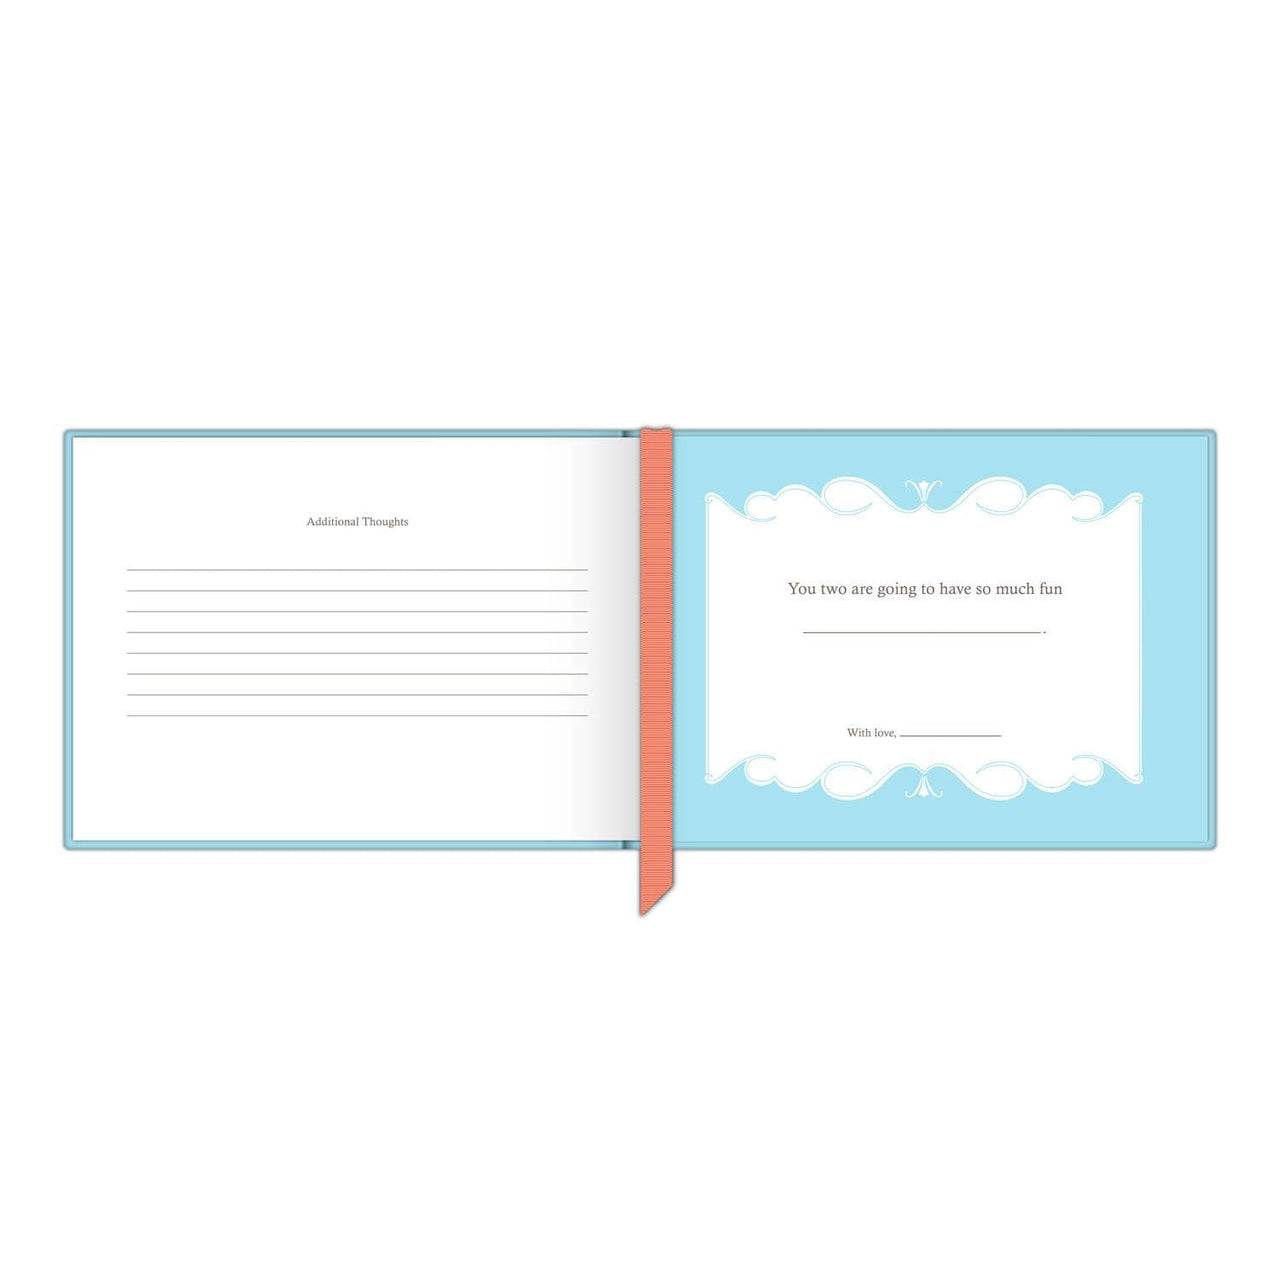 Wishes, Advice, and Happy Thoughts for Your Marriage Fill in the Love Gift Book, Paper Gift by Knock Knock | LIT Boutique